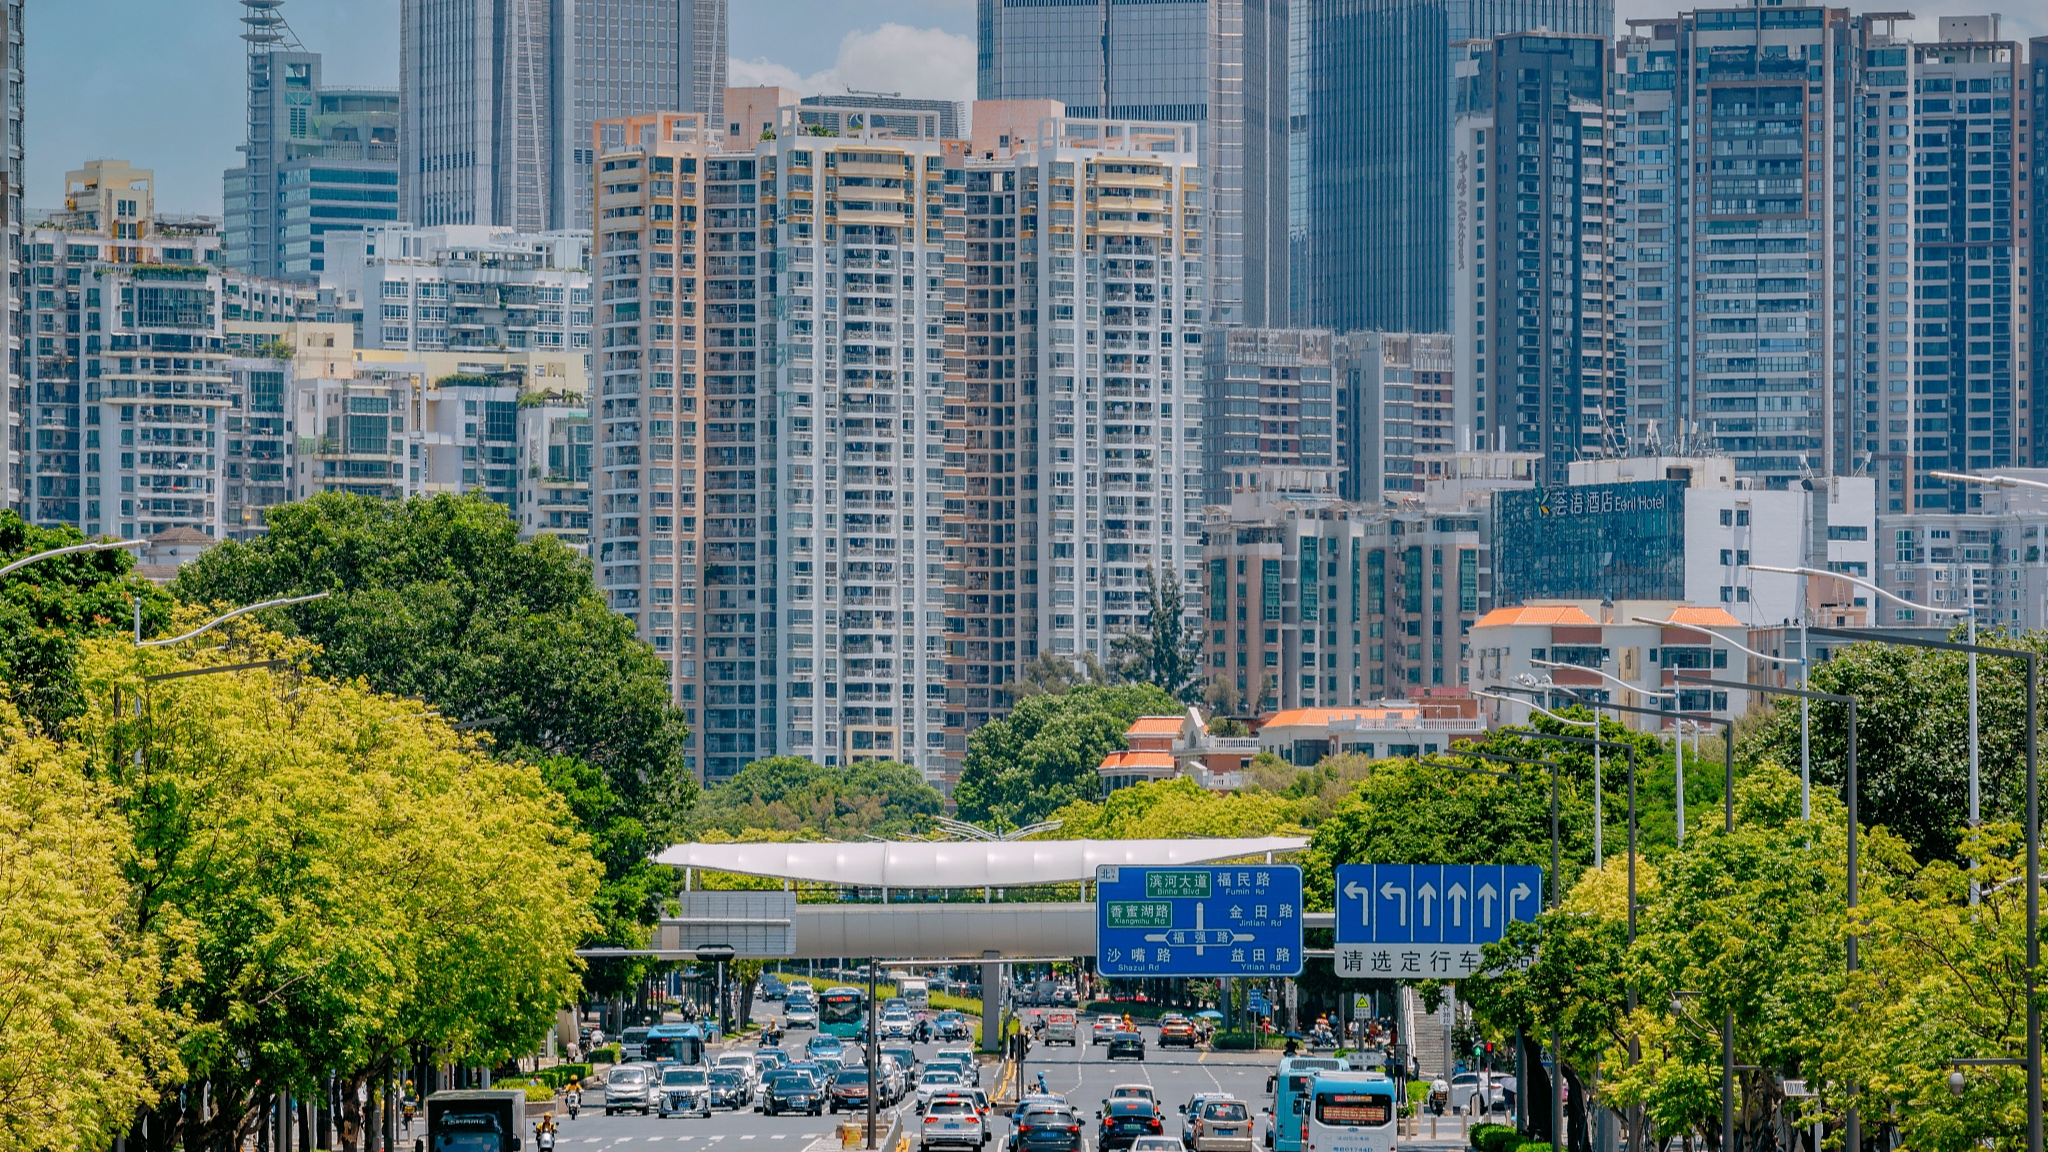 A view of Shenzhen City, south China's Guangdong Province. Shenzhen has been staying at the forefront of China's reform and opening up drive. /CFP